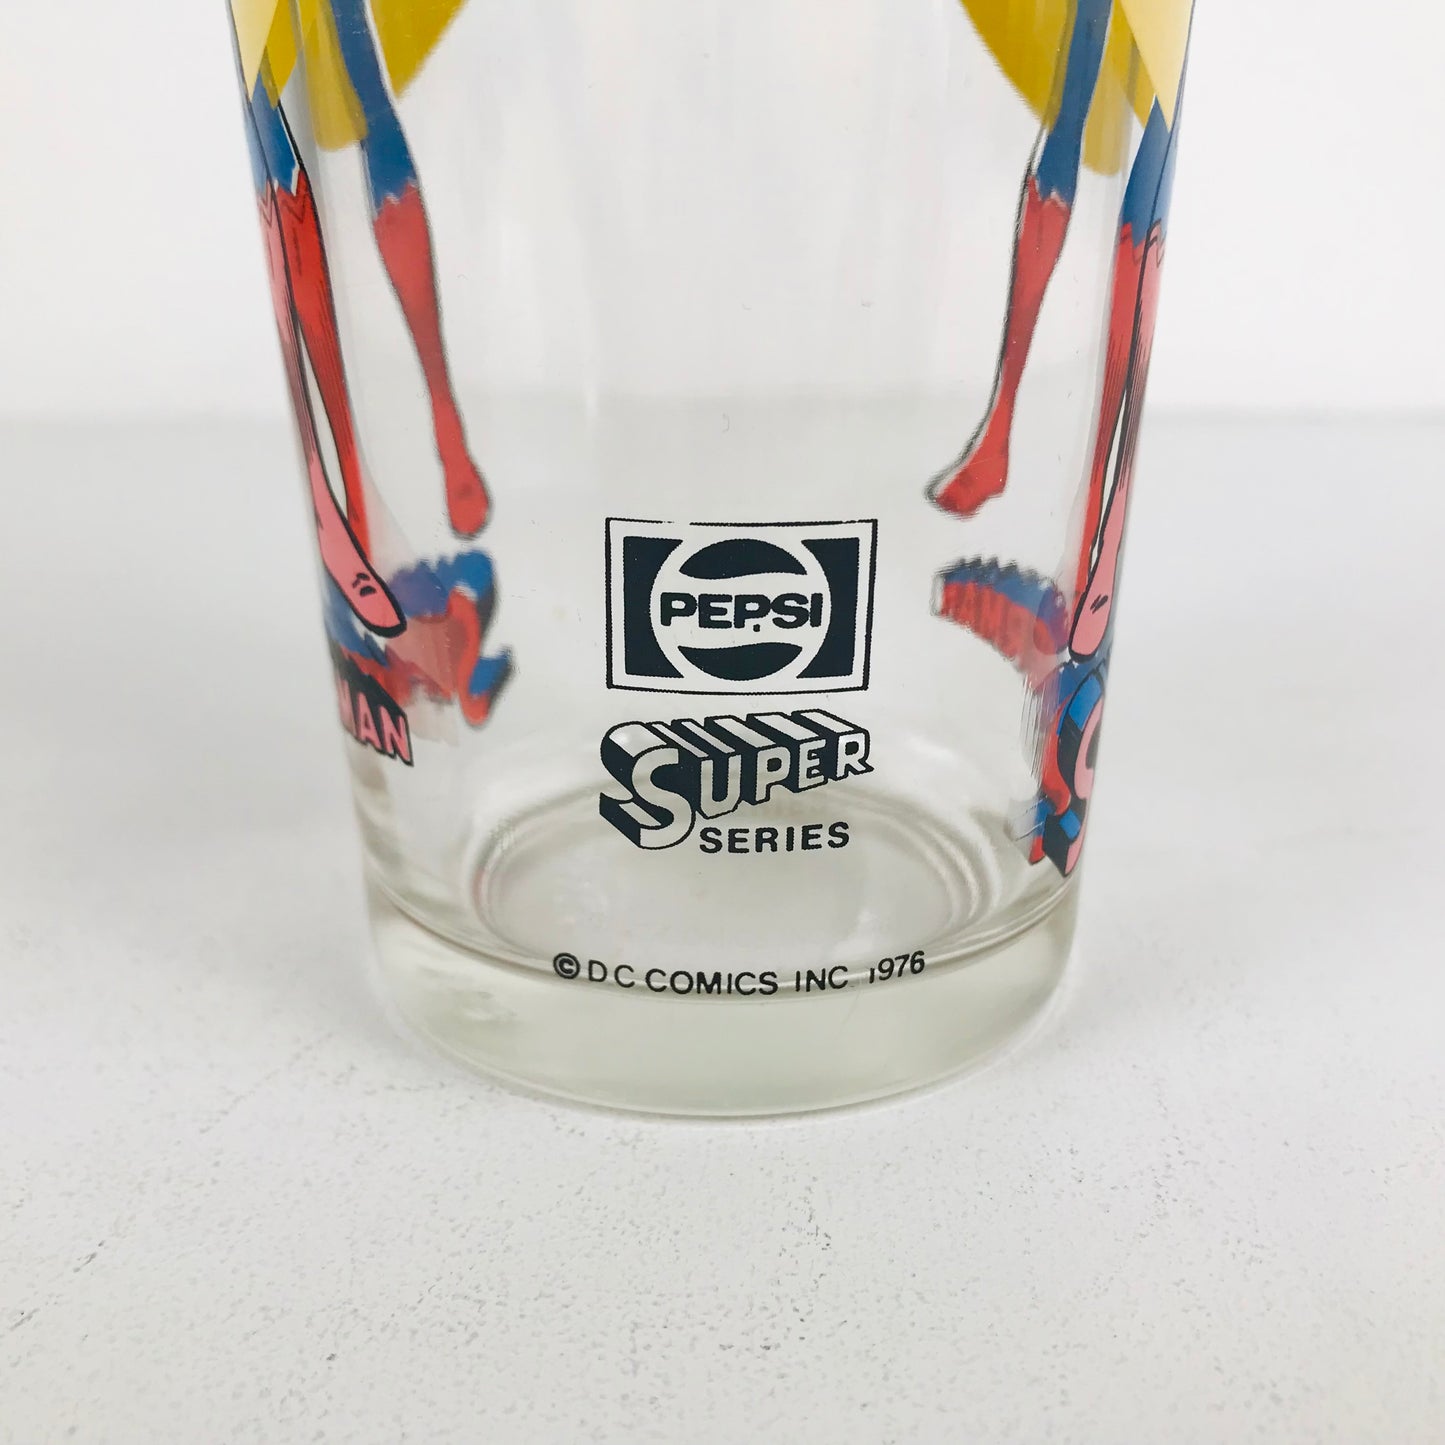 Back of a Superman glass showing the Pepsi Super Series logo and DC Comics product date of 1976